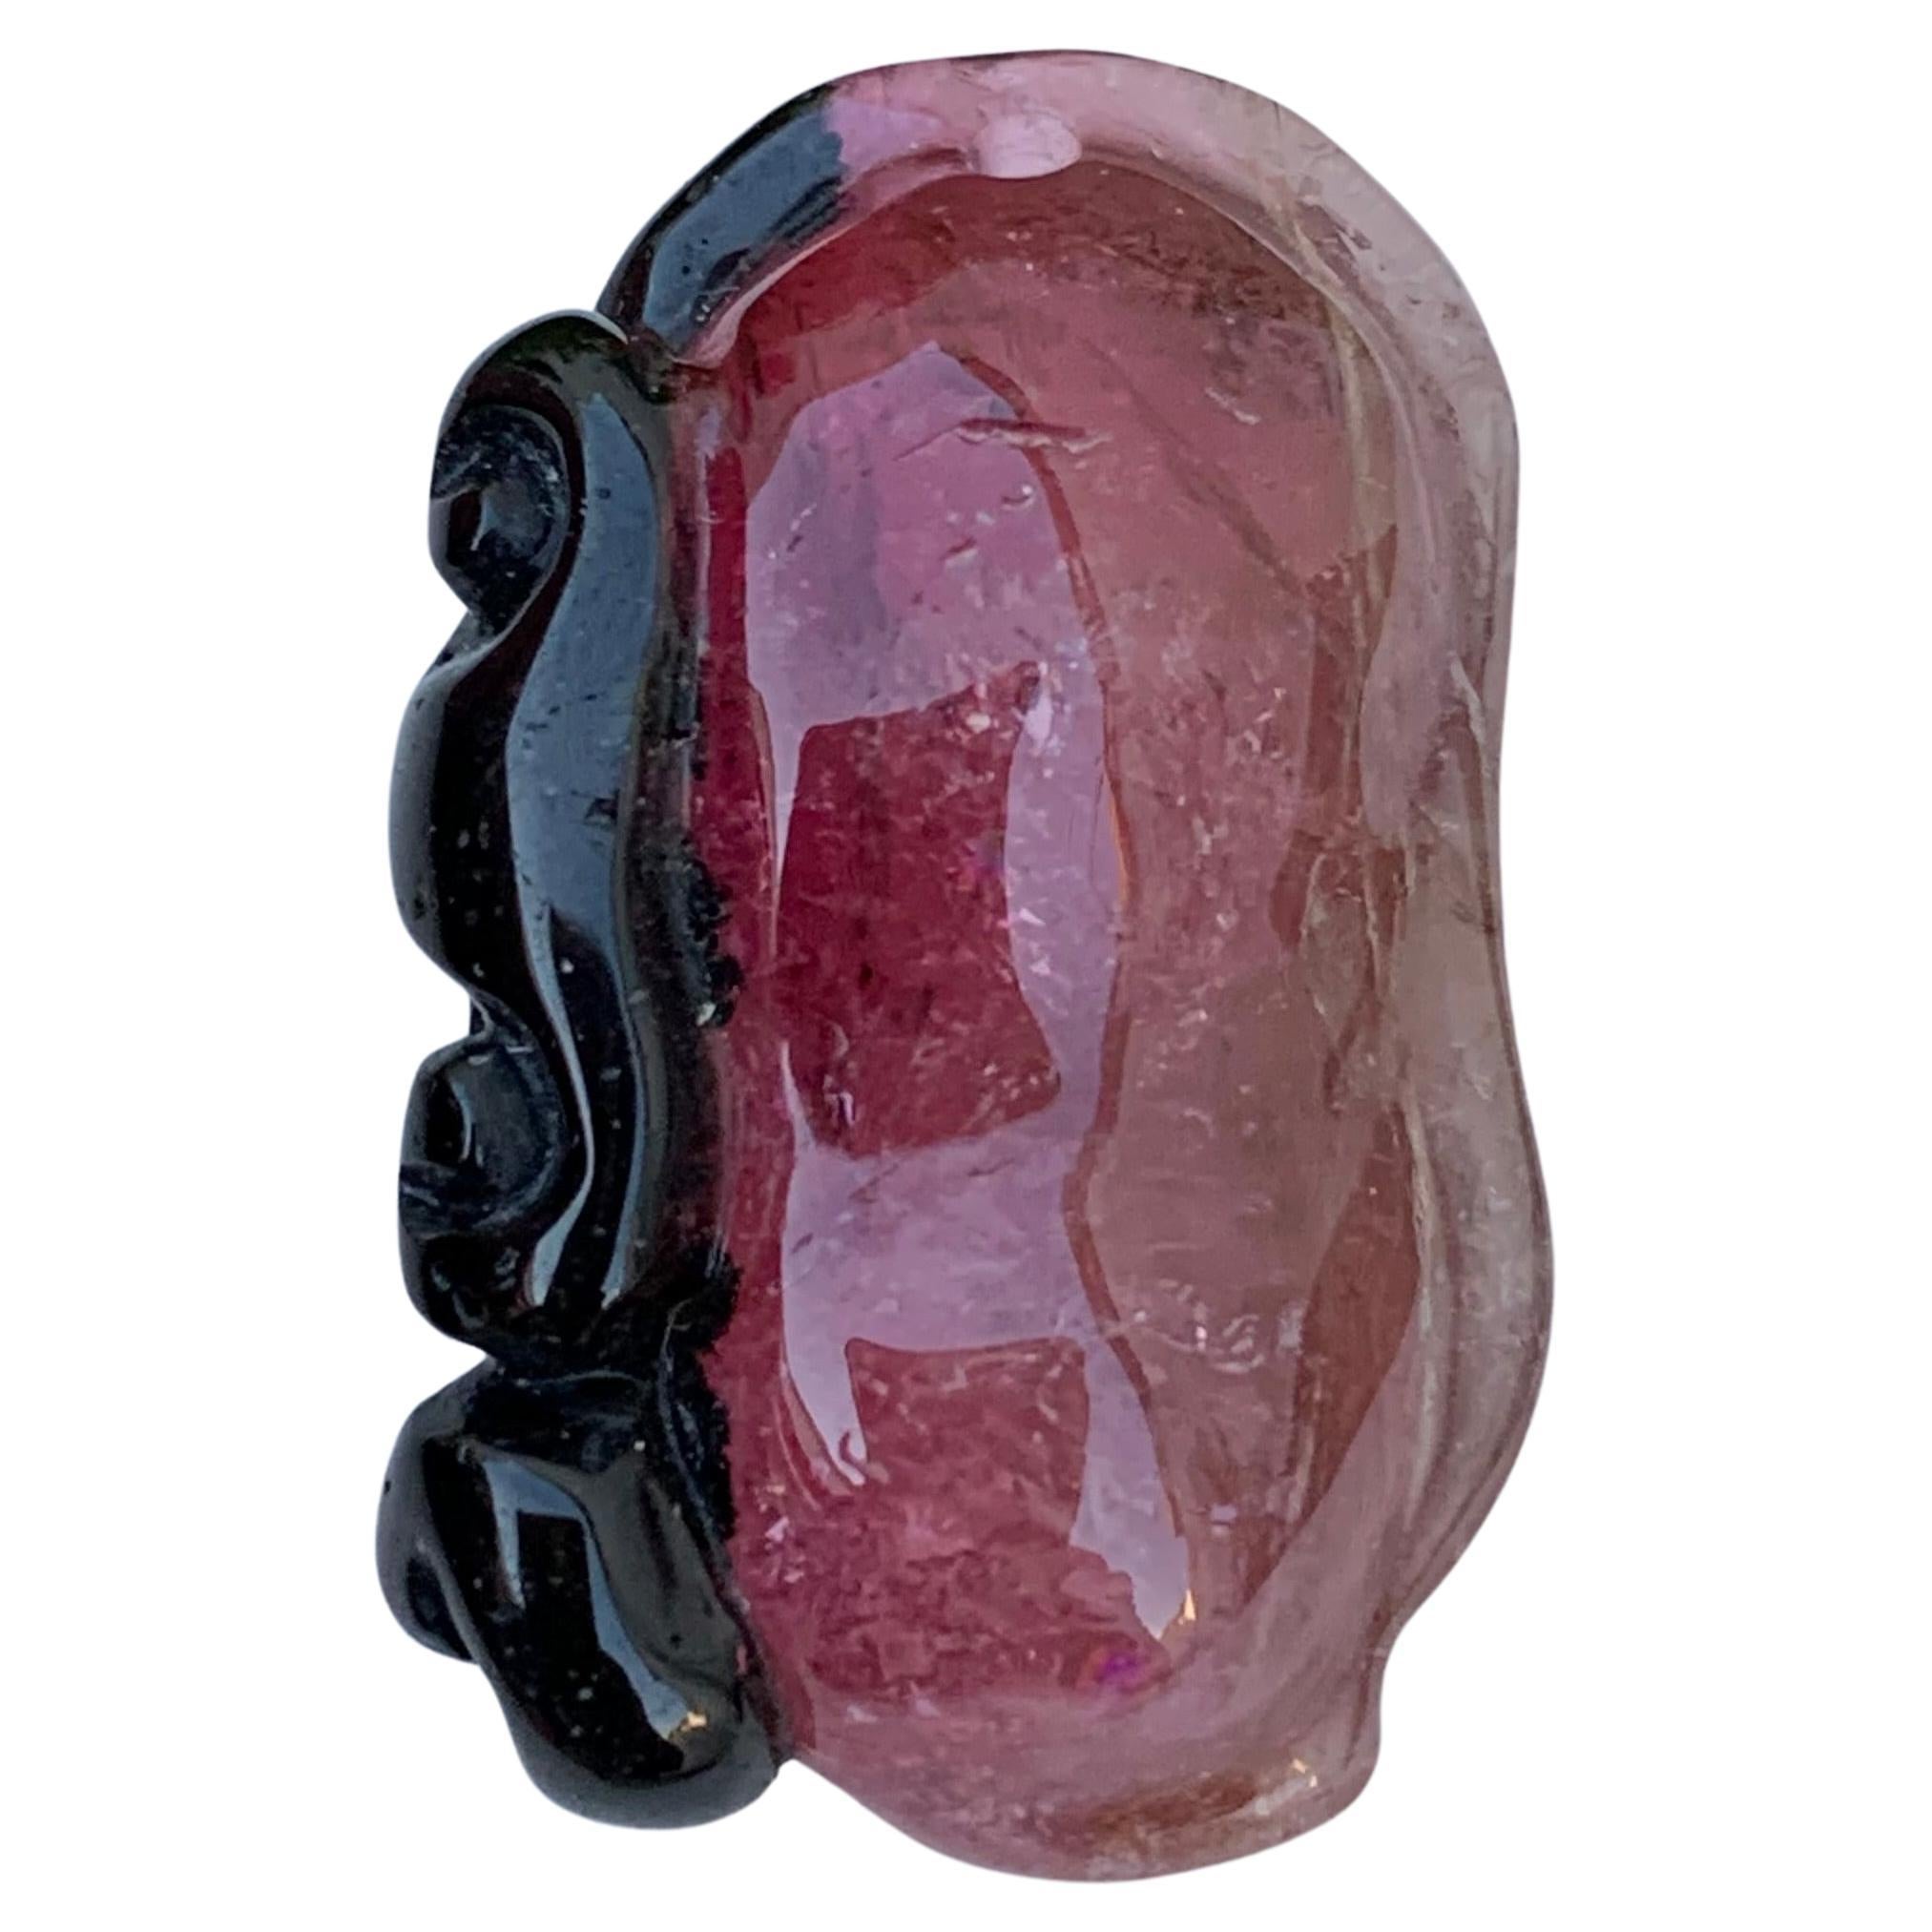 26.70 Carat Fruit Shape Bi Colour Tourmaline Drilled Carving From Africa 